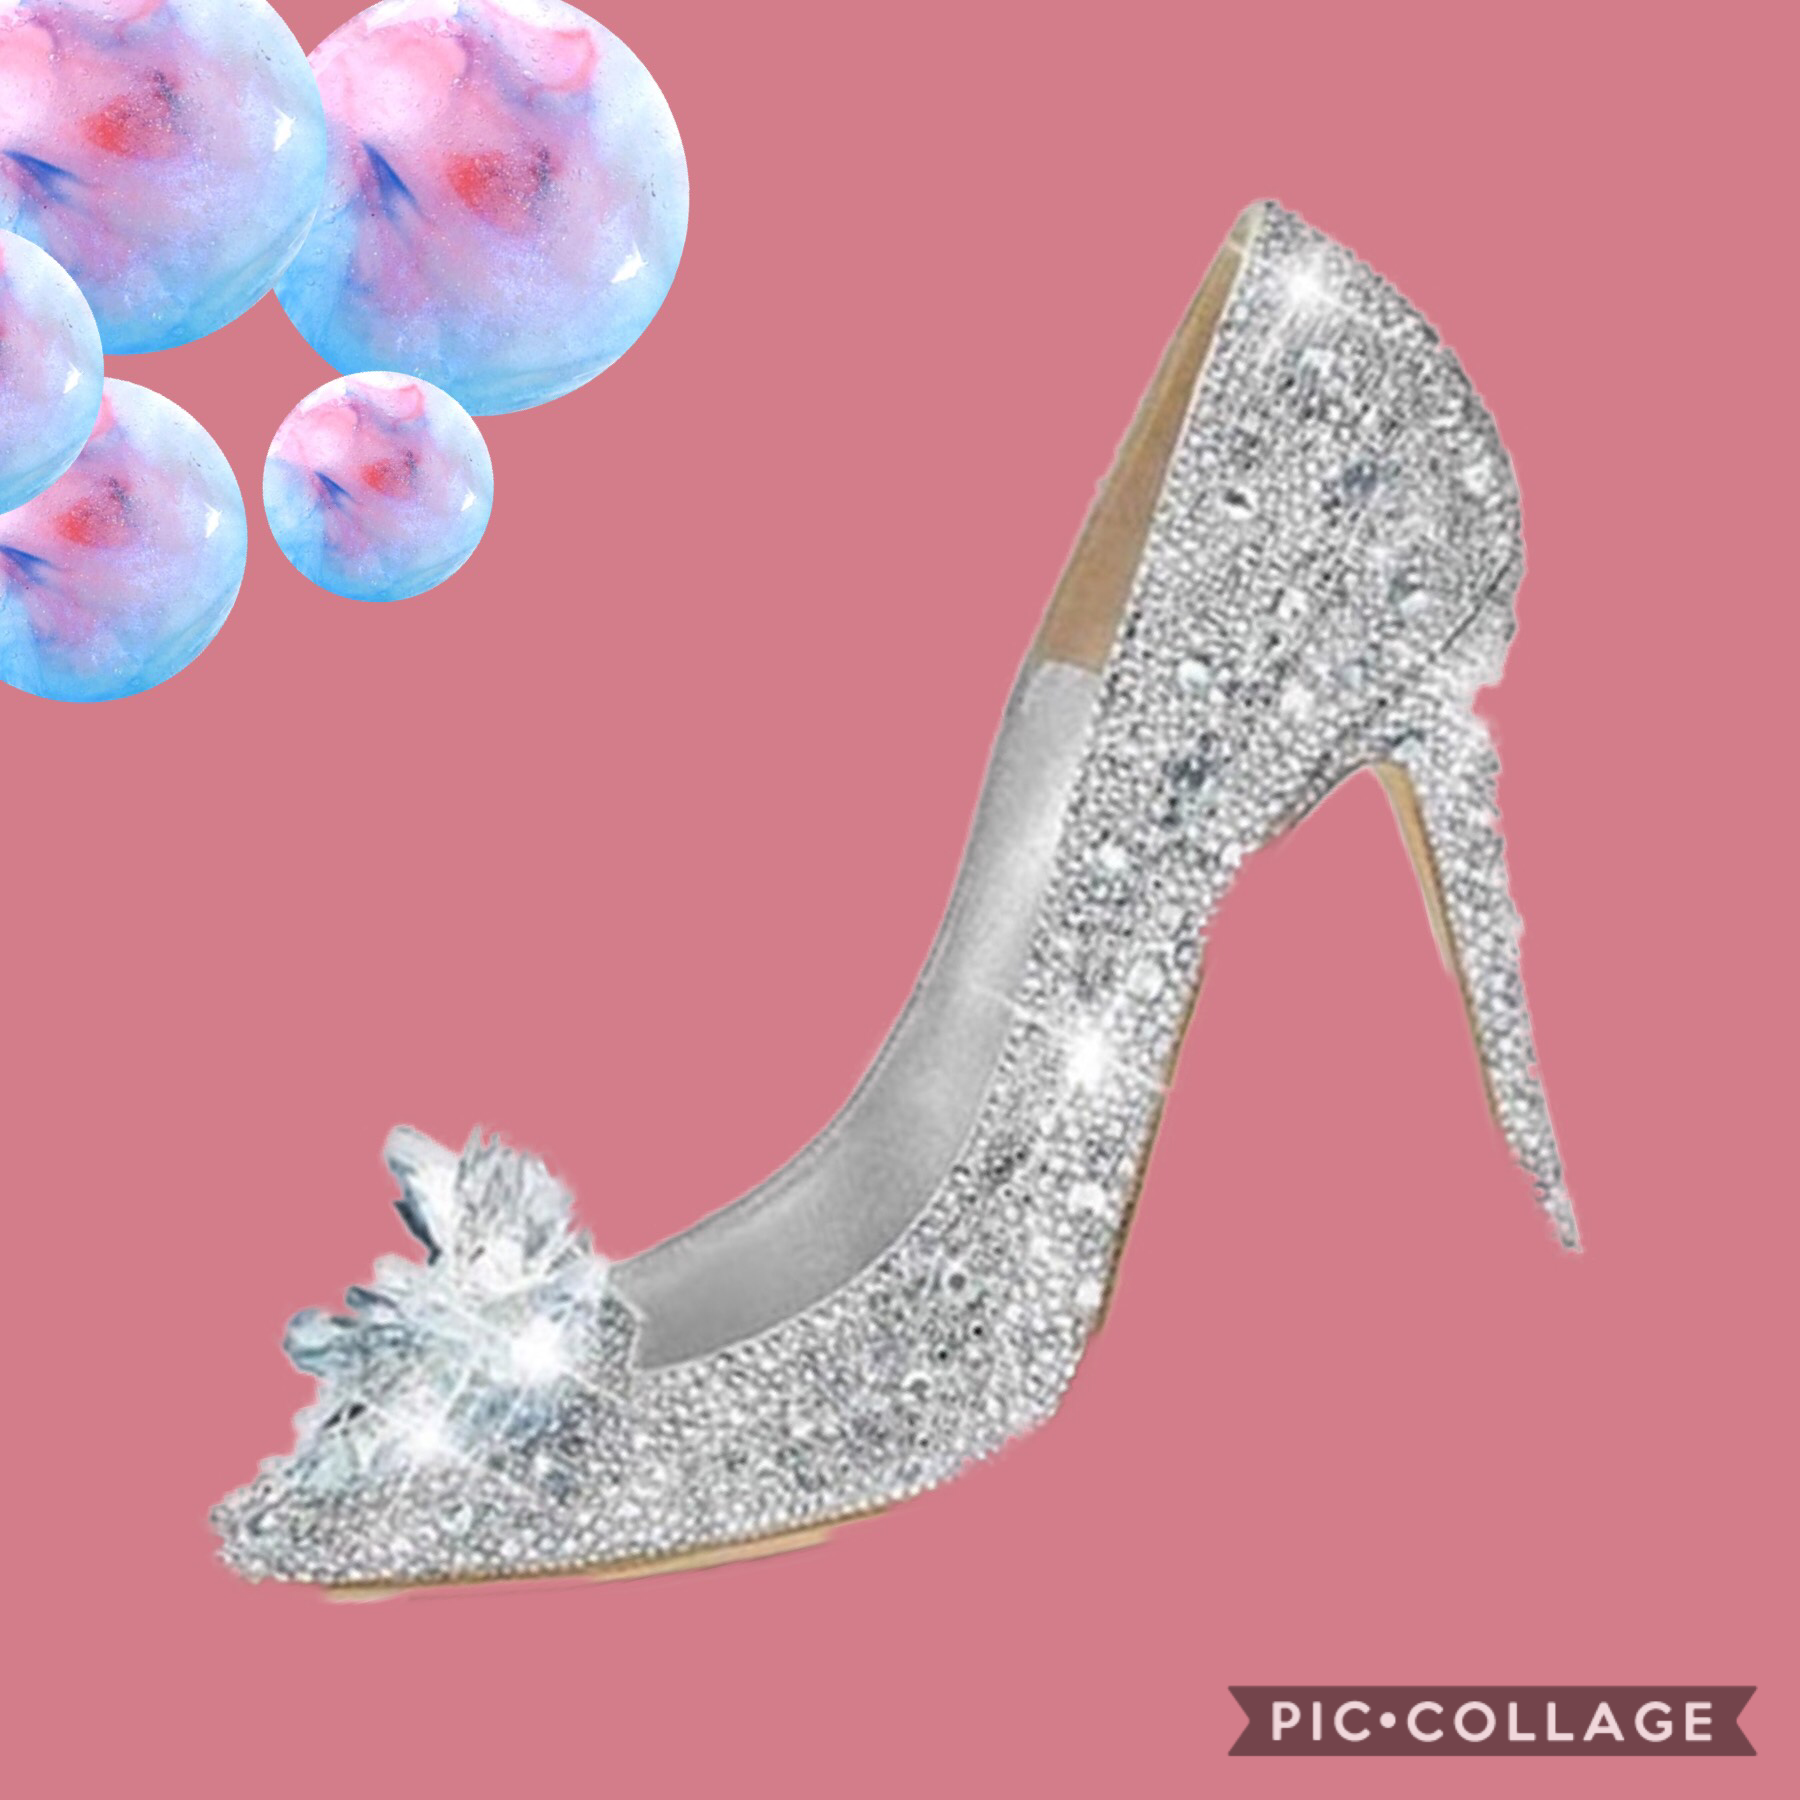 Comment down below if you think the shoe looks like Cinderella’s!!! 👠👠👠👠